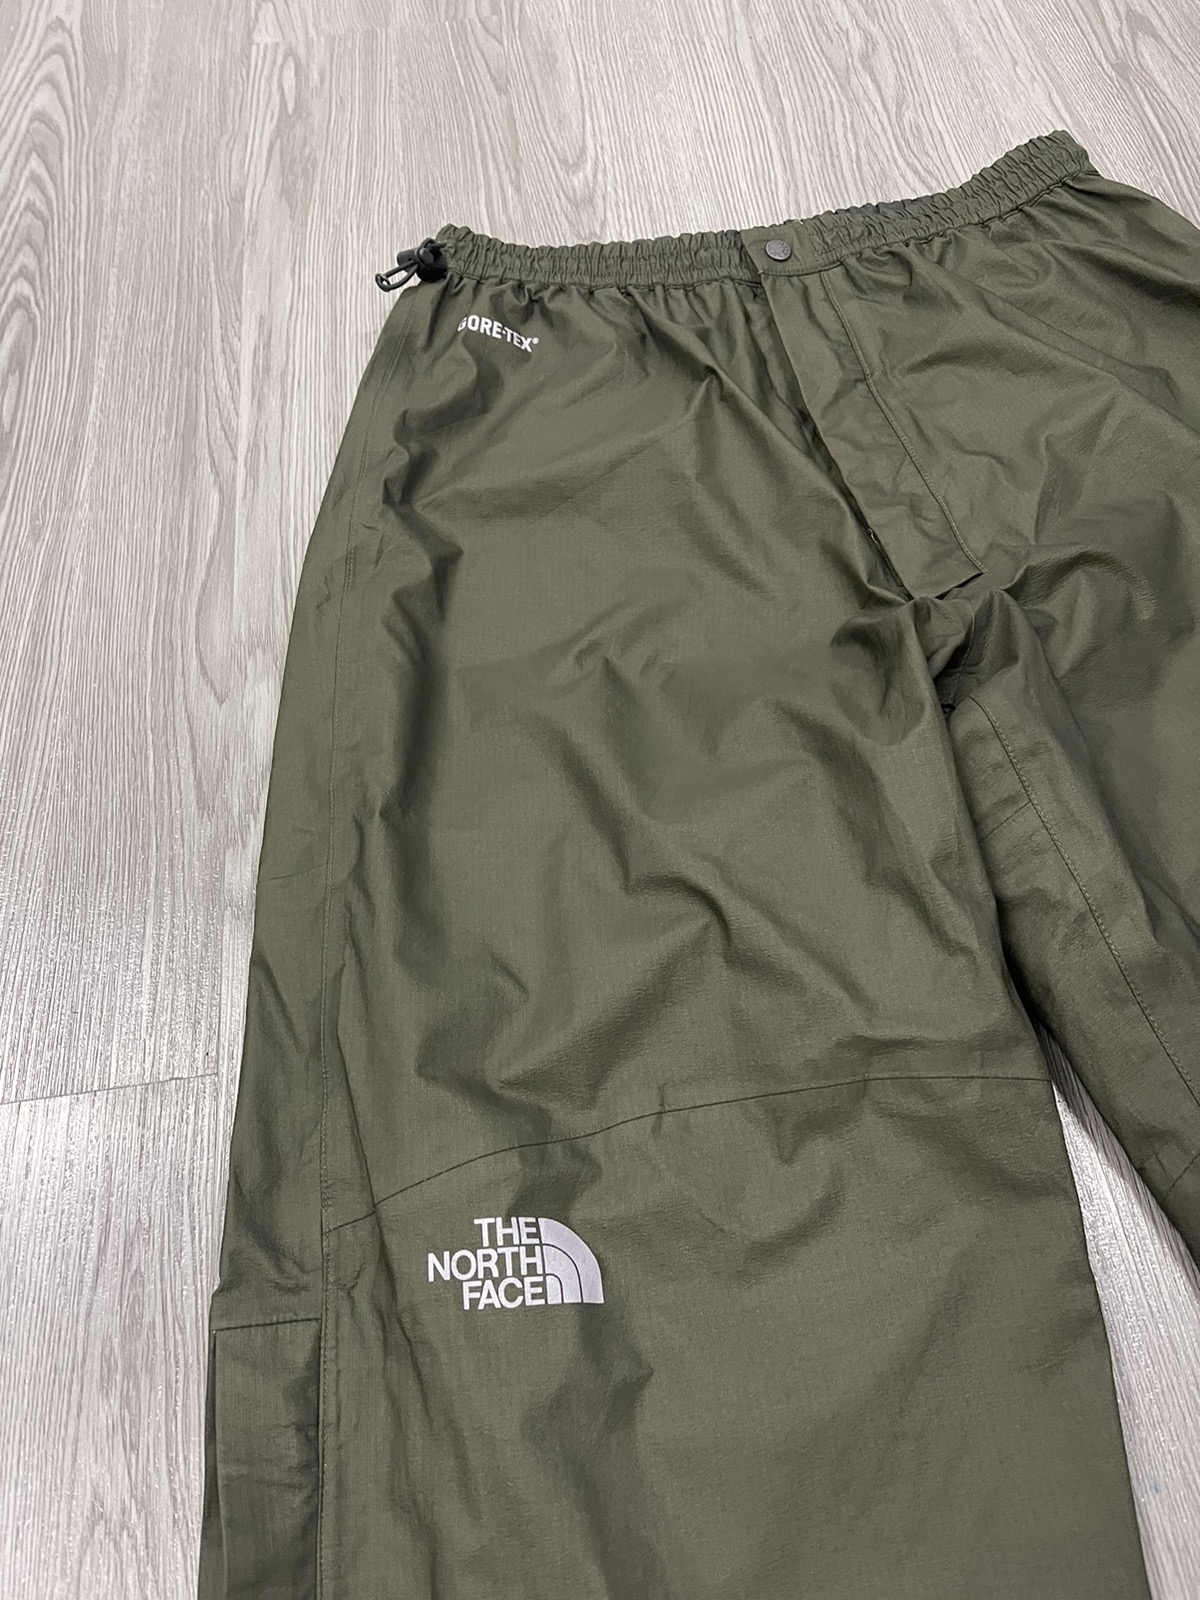 Gorpcore deal🔥The North Face Goretex pant in green - 3